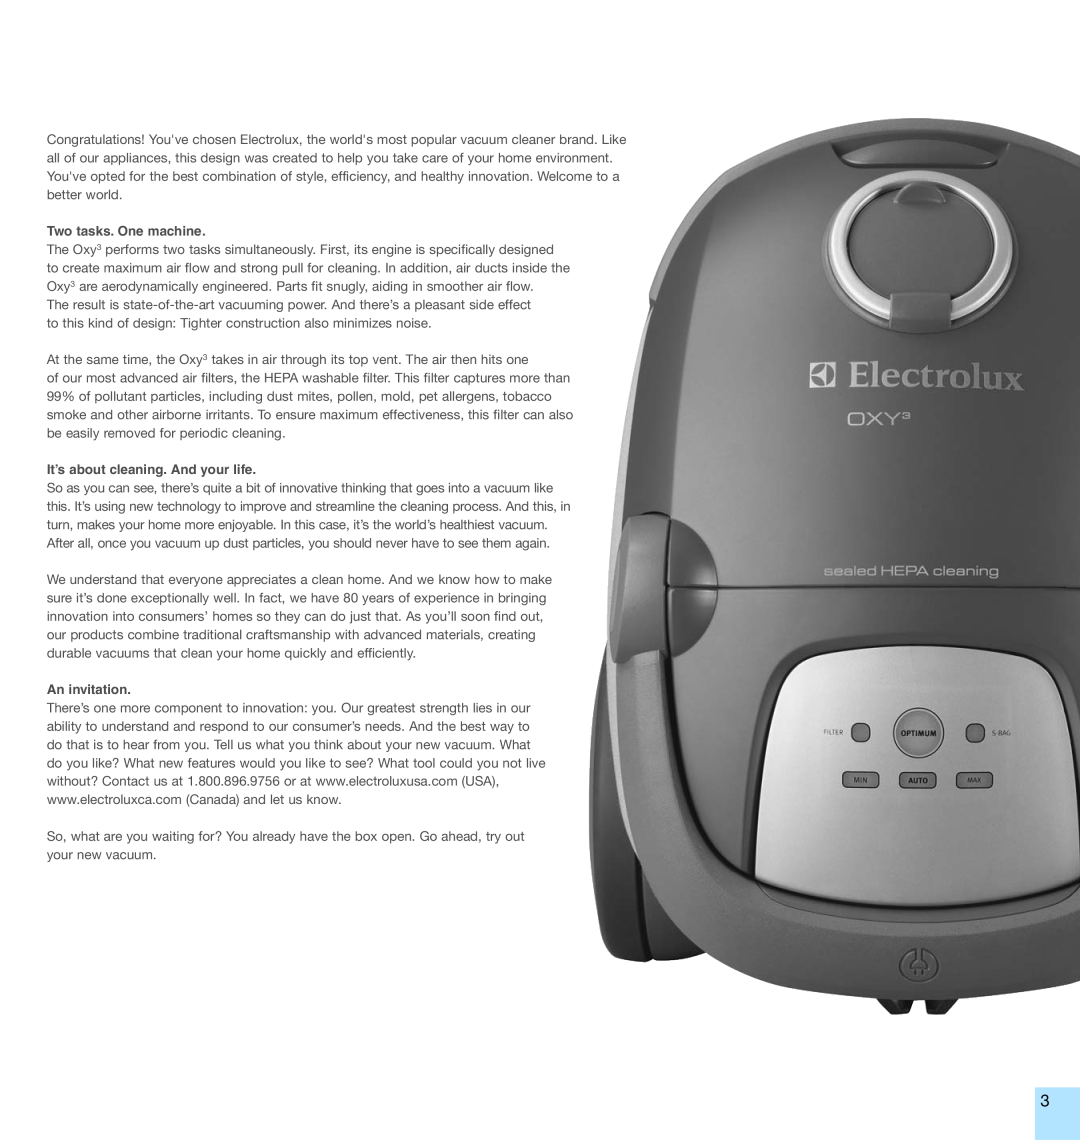 Electrolux EL7000A manual Two tasks. One machine, It’s about cleaning. And your life, An invitation 